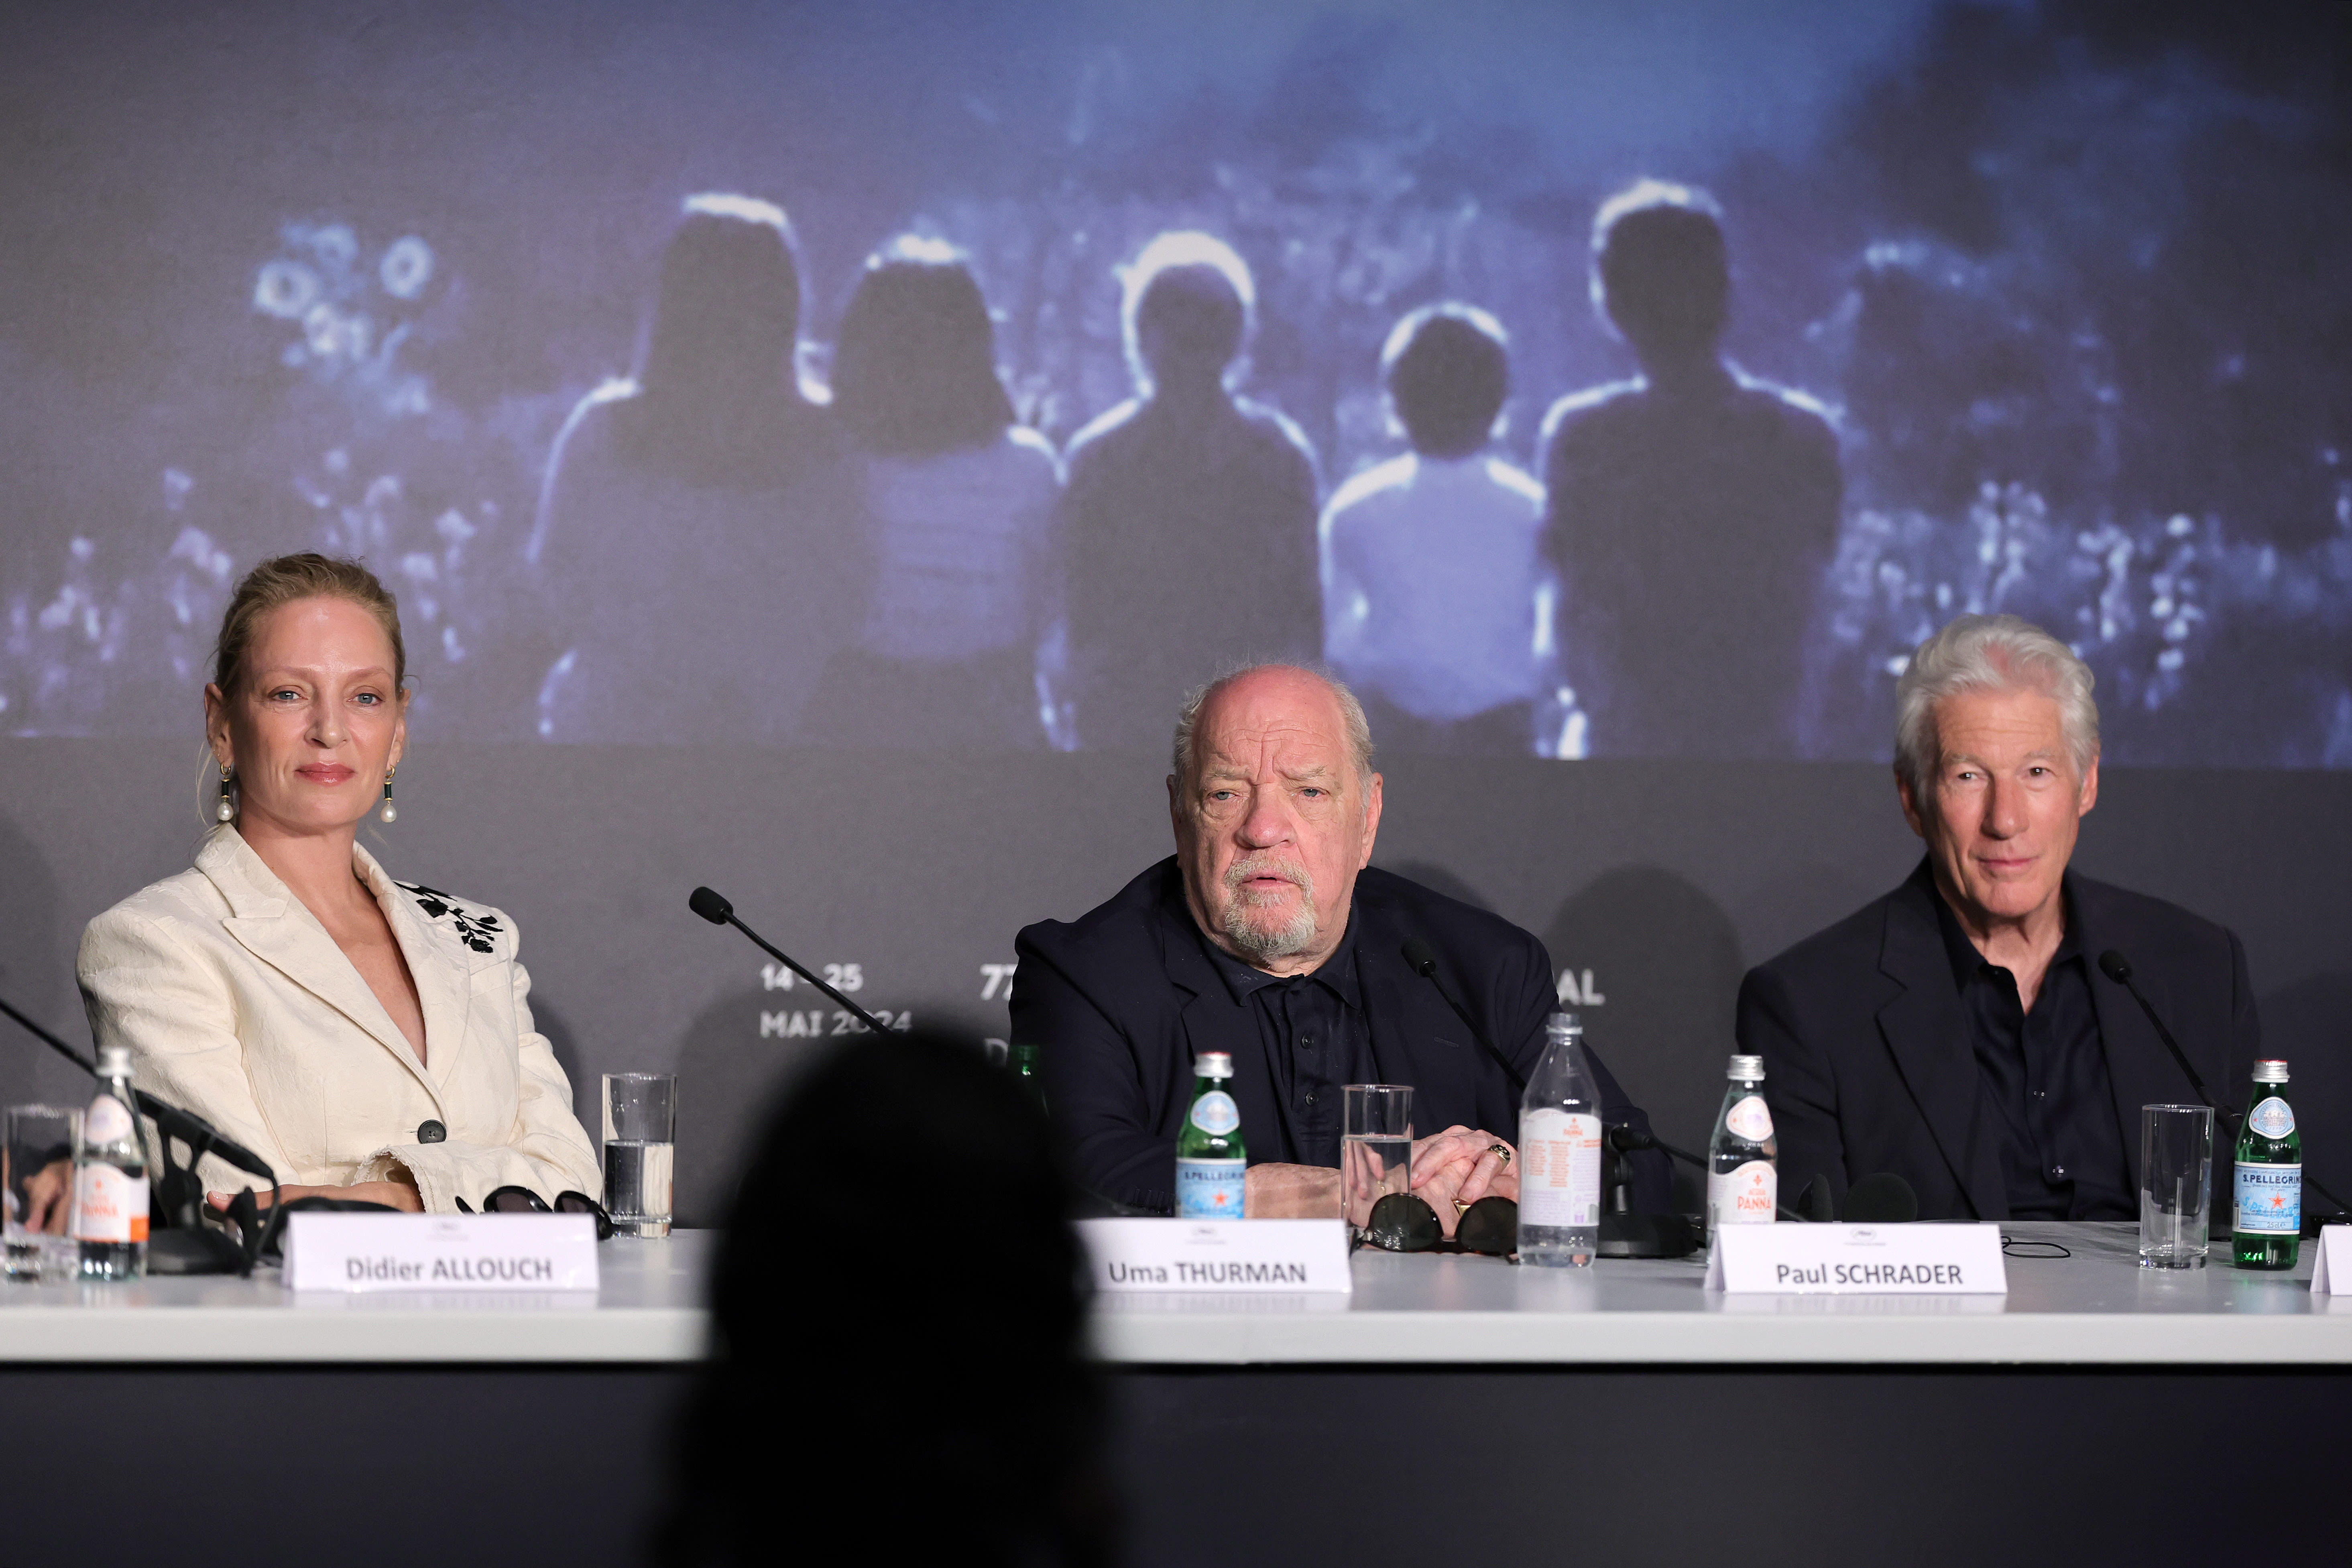 Paul Schrader Teases Next Film “Non Compos Mentis’ To Shoot In Fall; Talks Collaboration On ‘Oh, Canada’ With Richard...